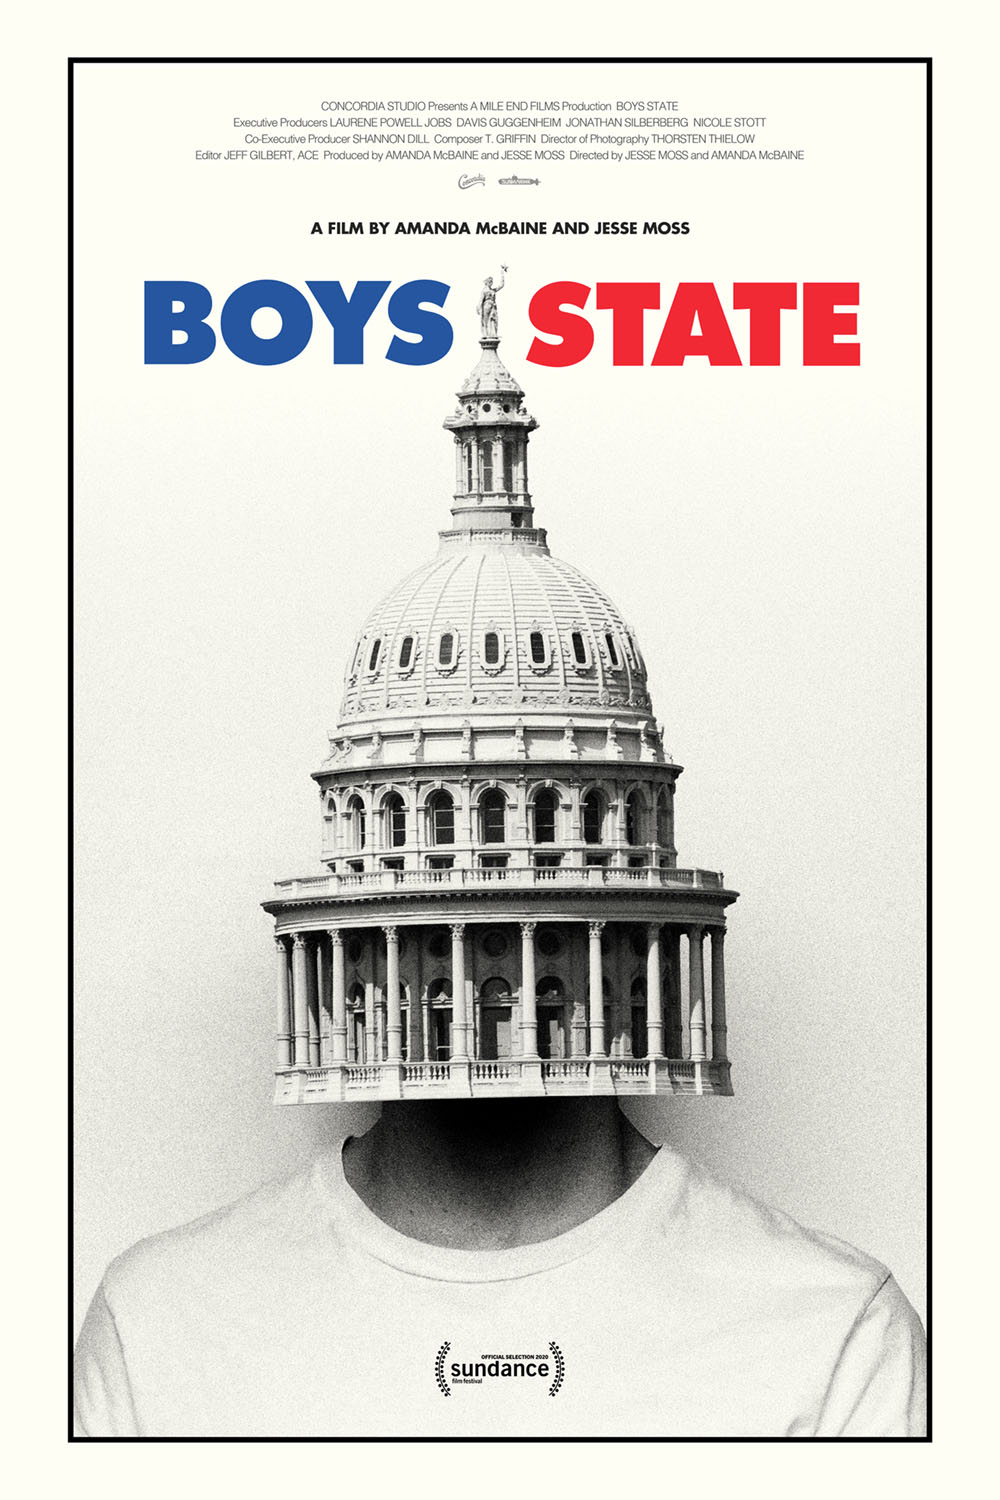 Movie poster for Boys State, capital building